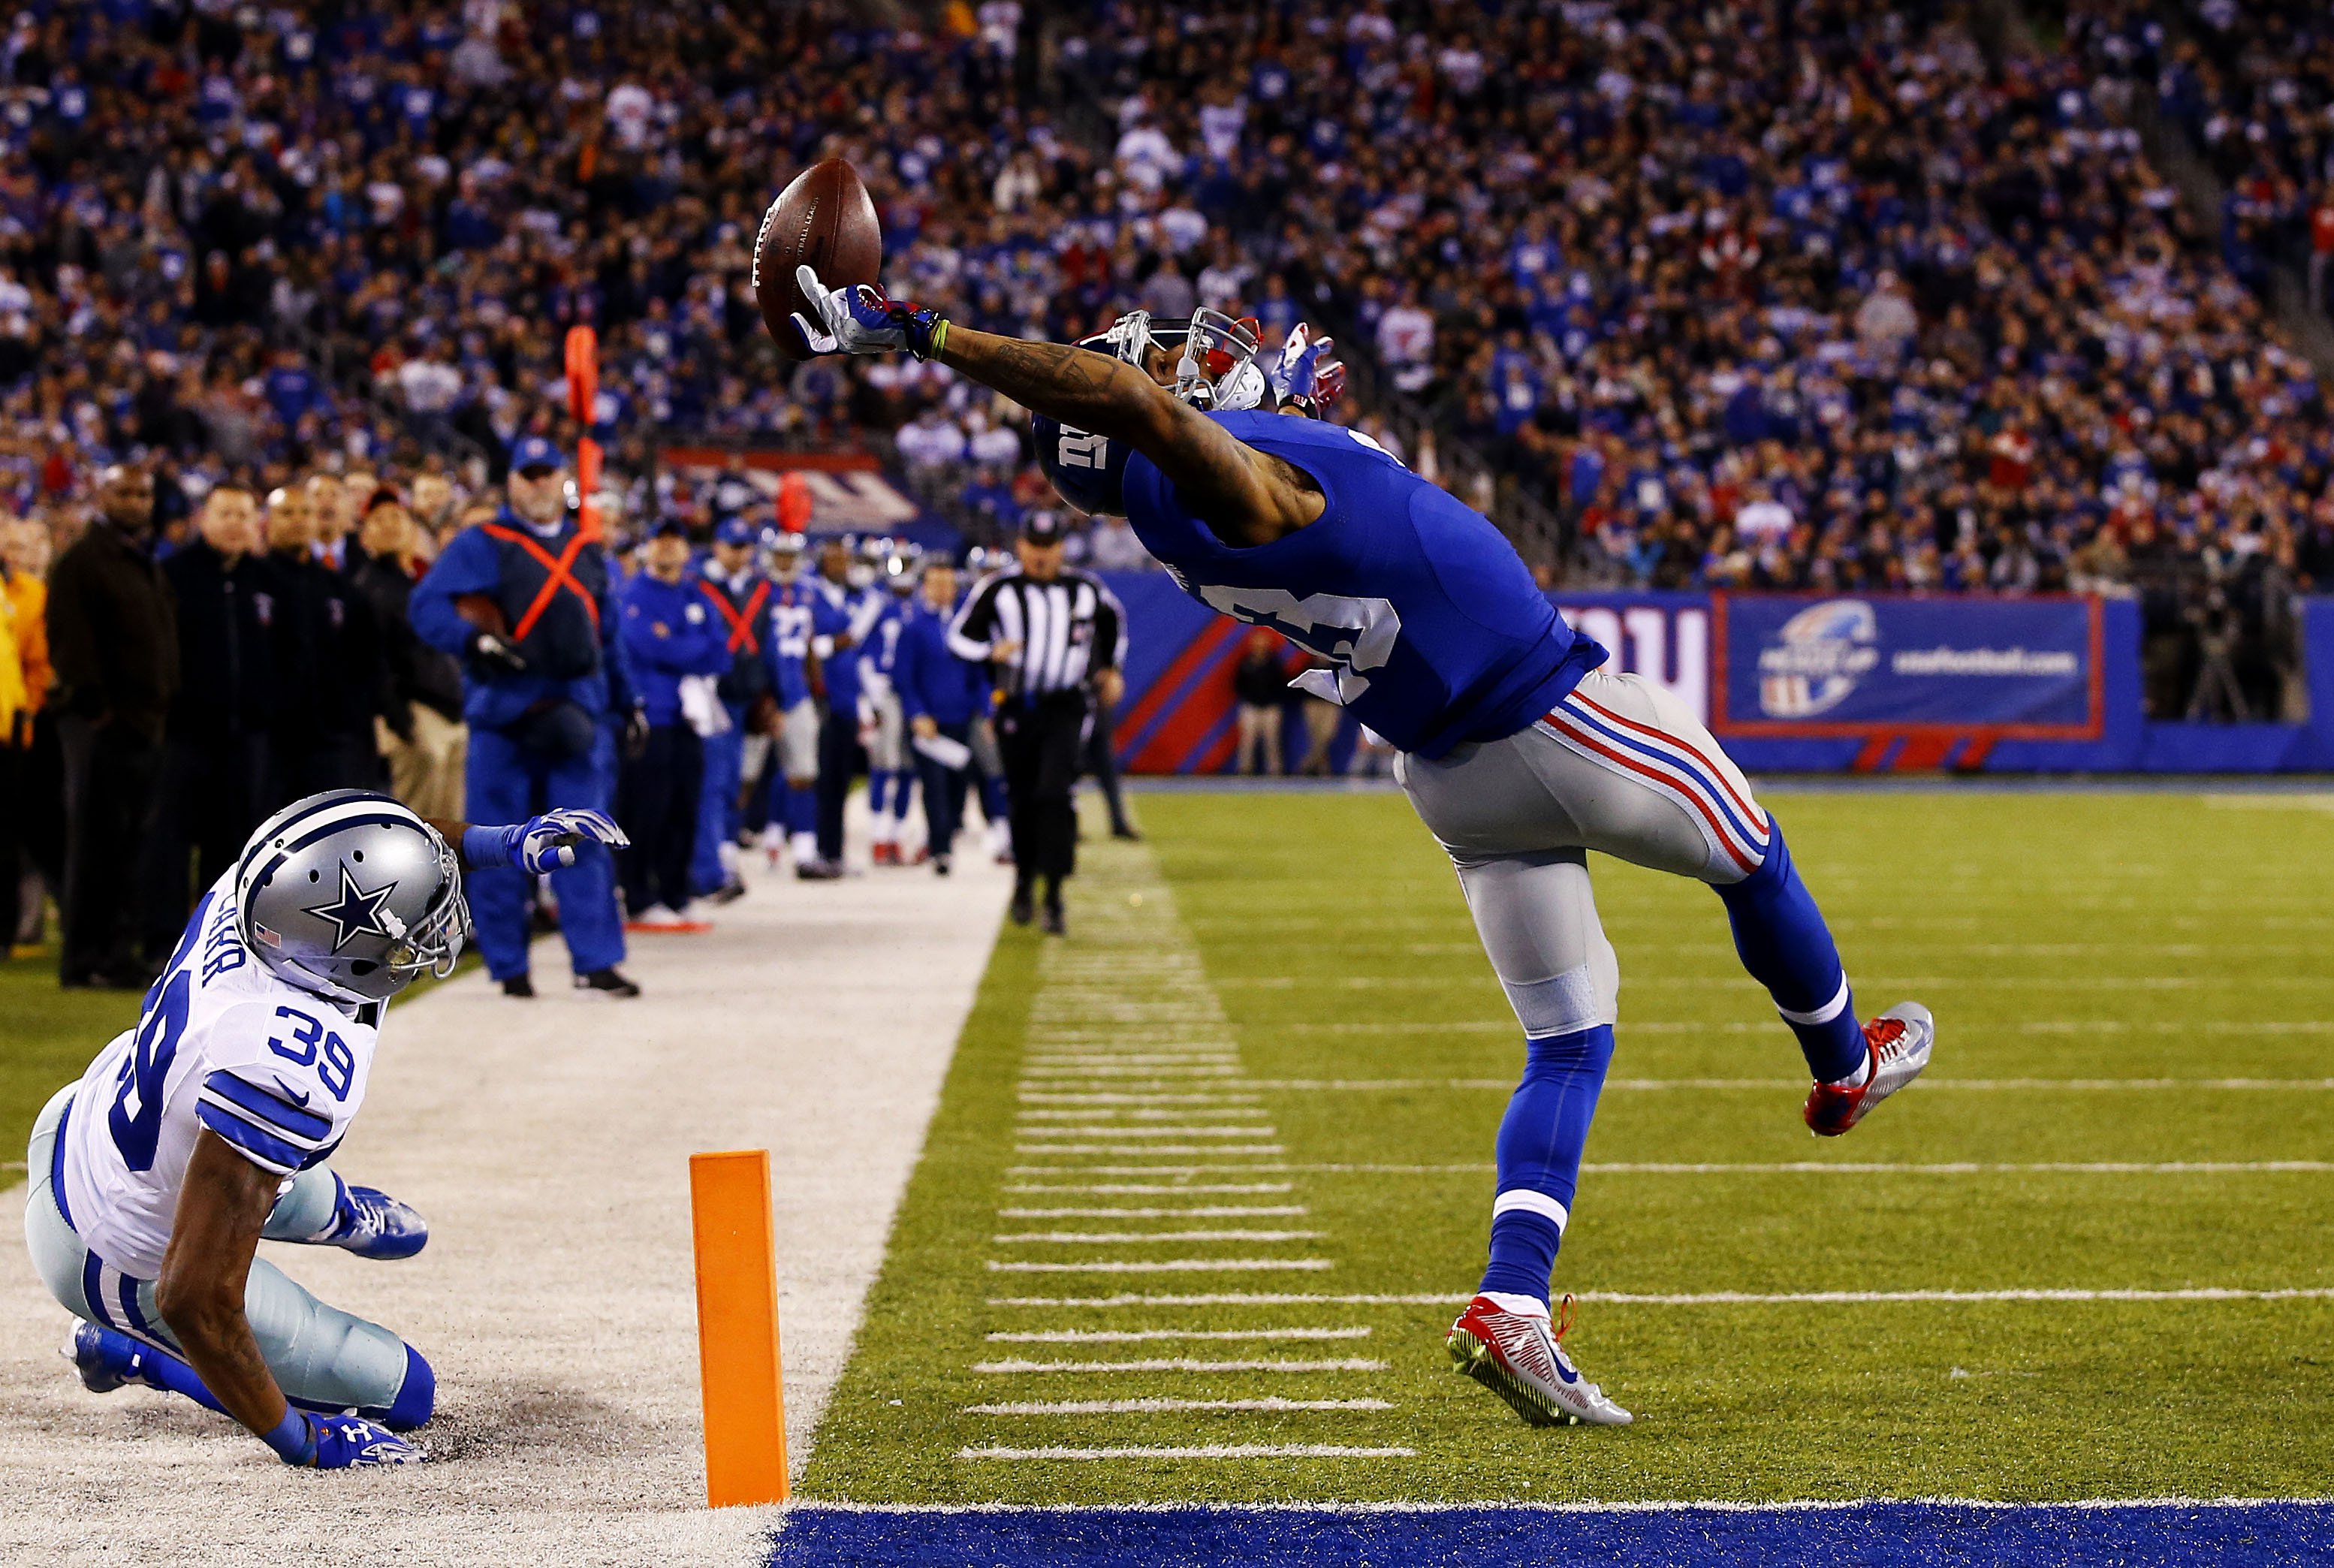 Odell Beckham #13 of the New York Giants scores a touchdown in the second quarter against the Dallas Cowboys at MetLife Stadium on Nov. 23, 2014 in East Rutherford, N.J. (Al Bello—Getty Images)